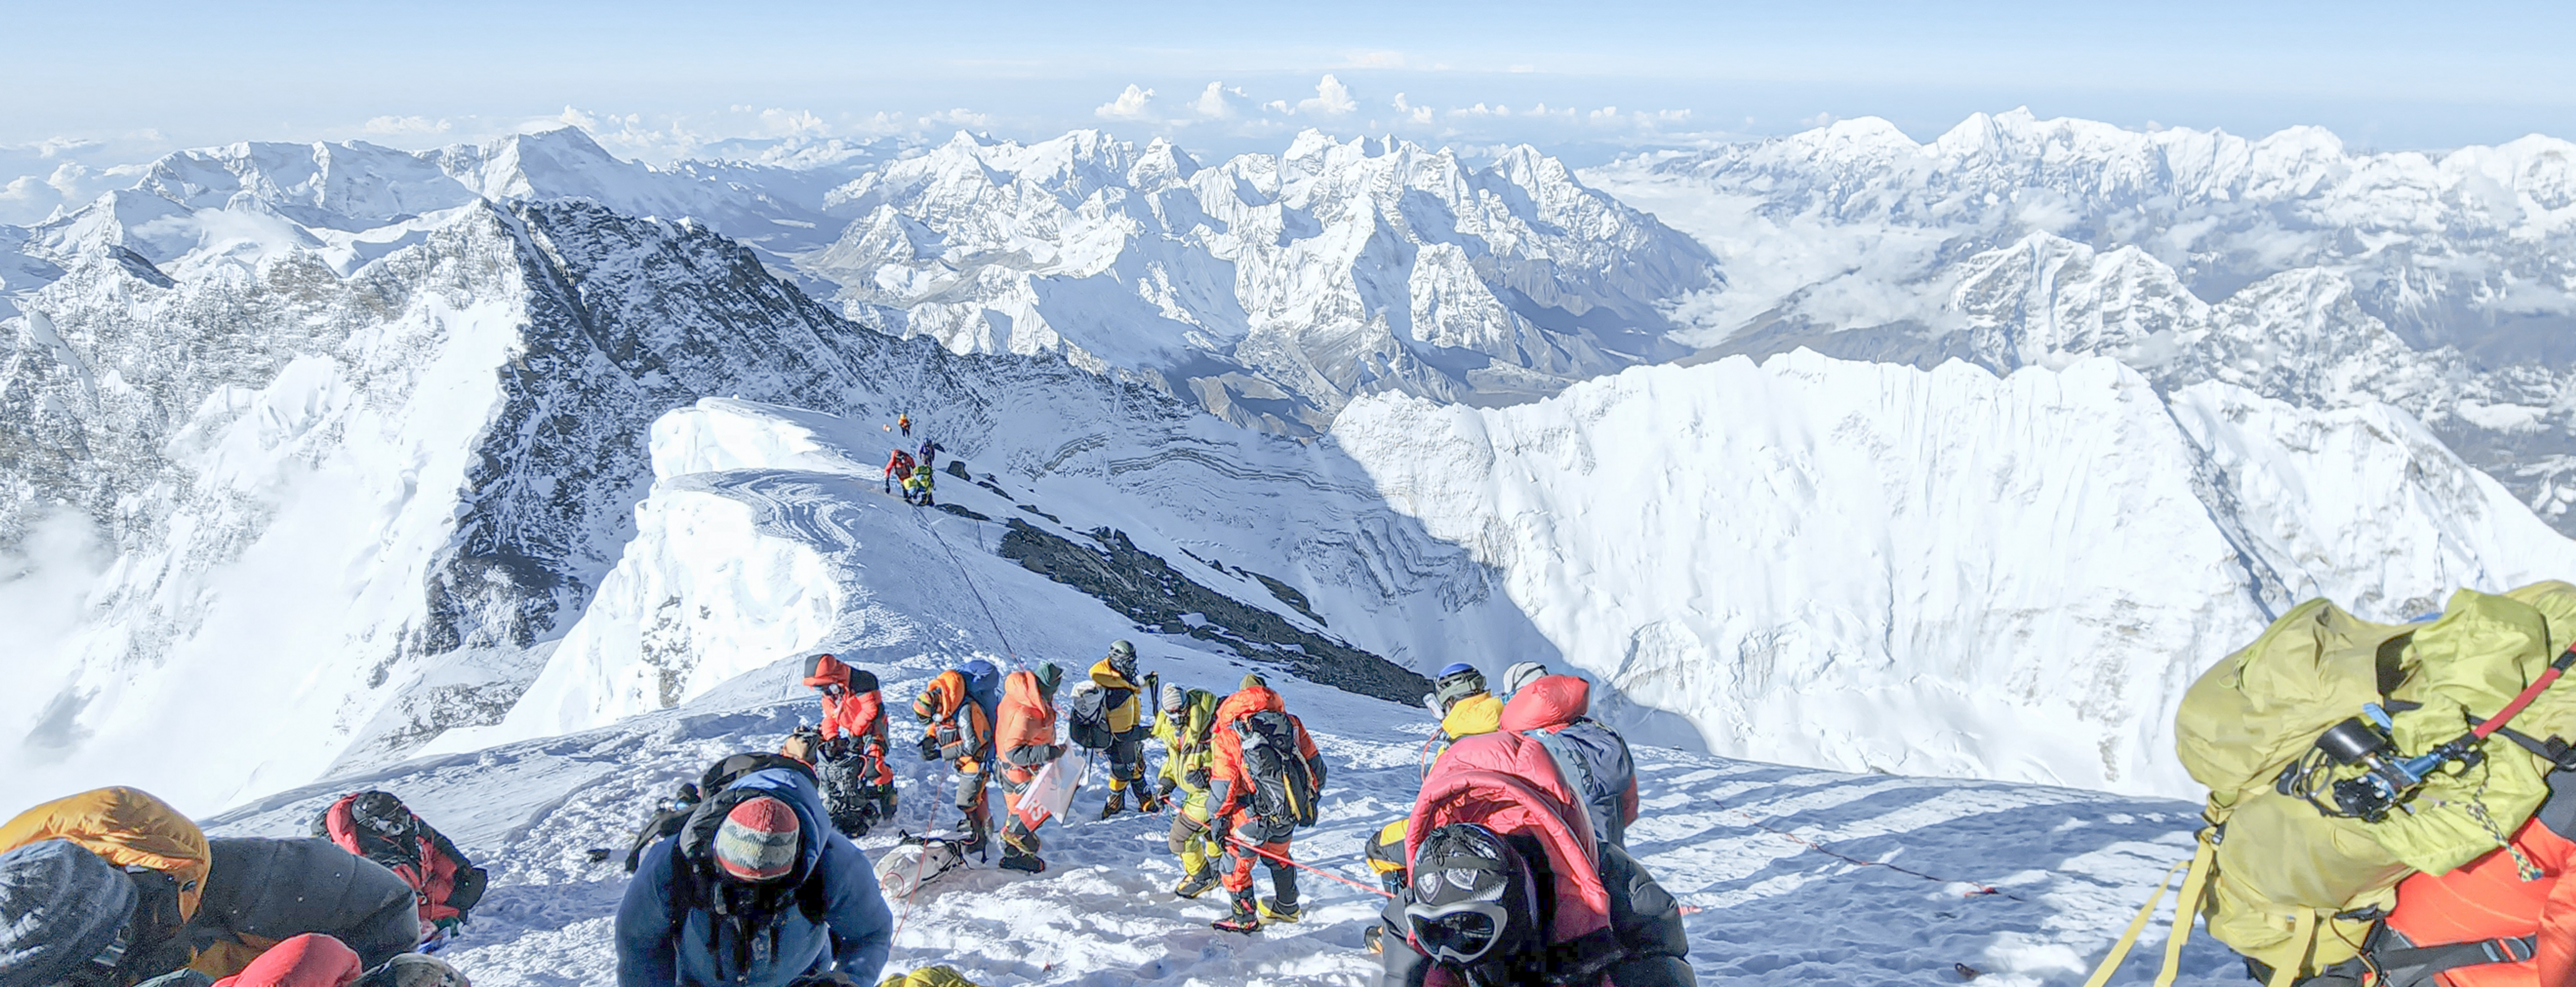 Climbers nearing the summit of Mt. Everest